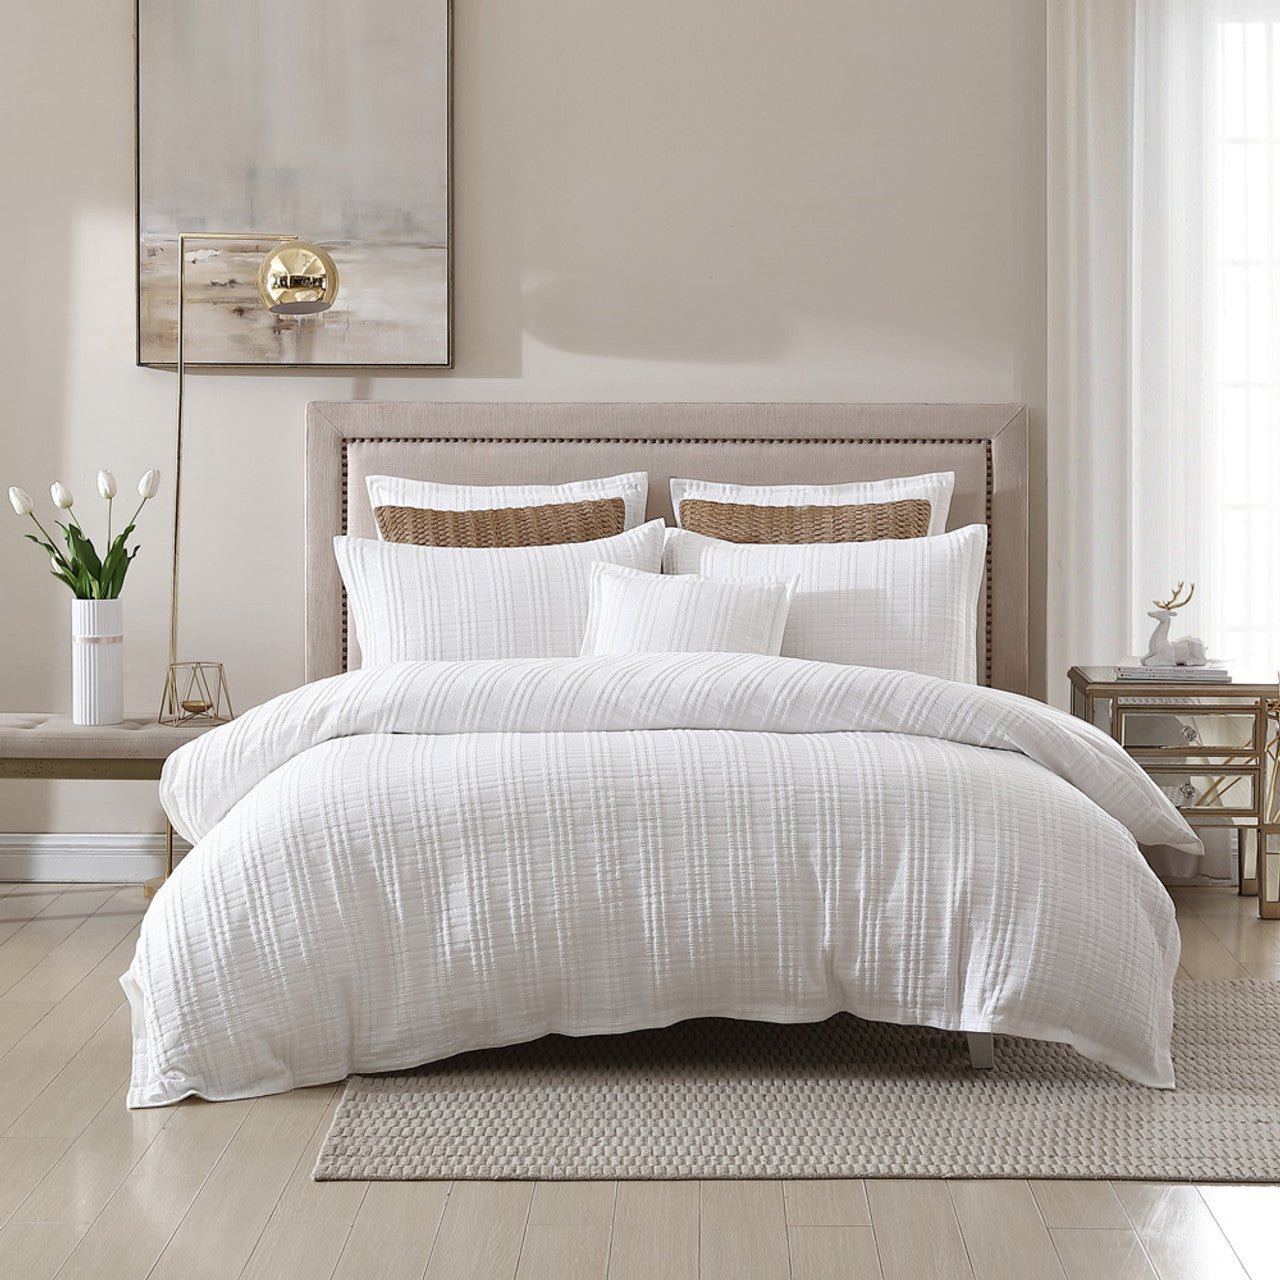 Experience timeless sophistication with the Private Collection Winton White Bed Quilt Cover Set. This exquisite collection showcases a captivating geometric jacquard design that exudes elegance. The Winton set is tastefully embellished with a self-bordered flange, adding a touch of refinement and creating a visually striking tailored appearance.